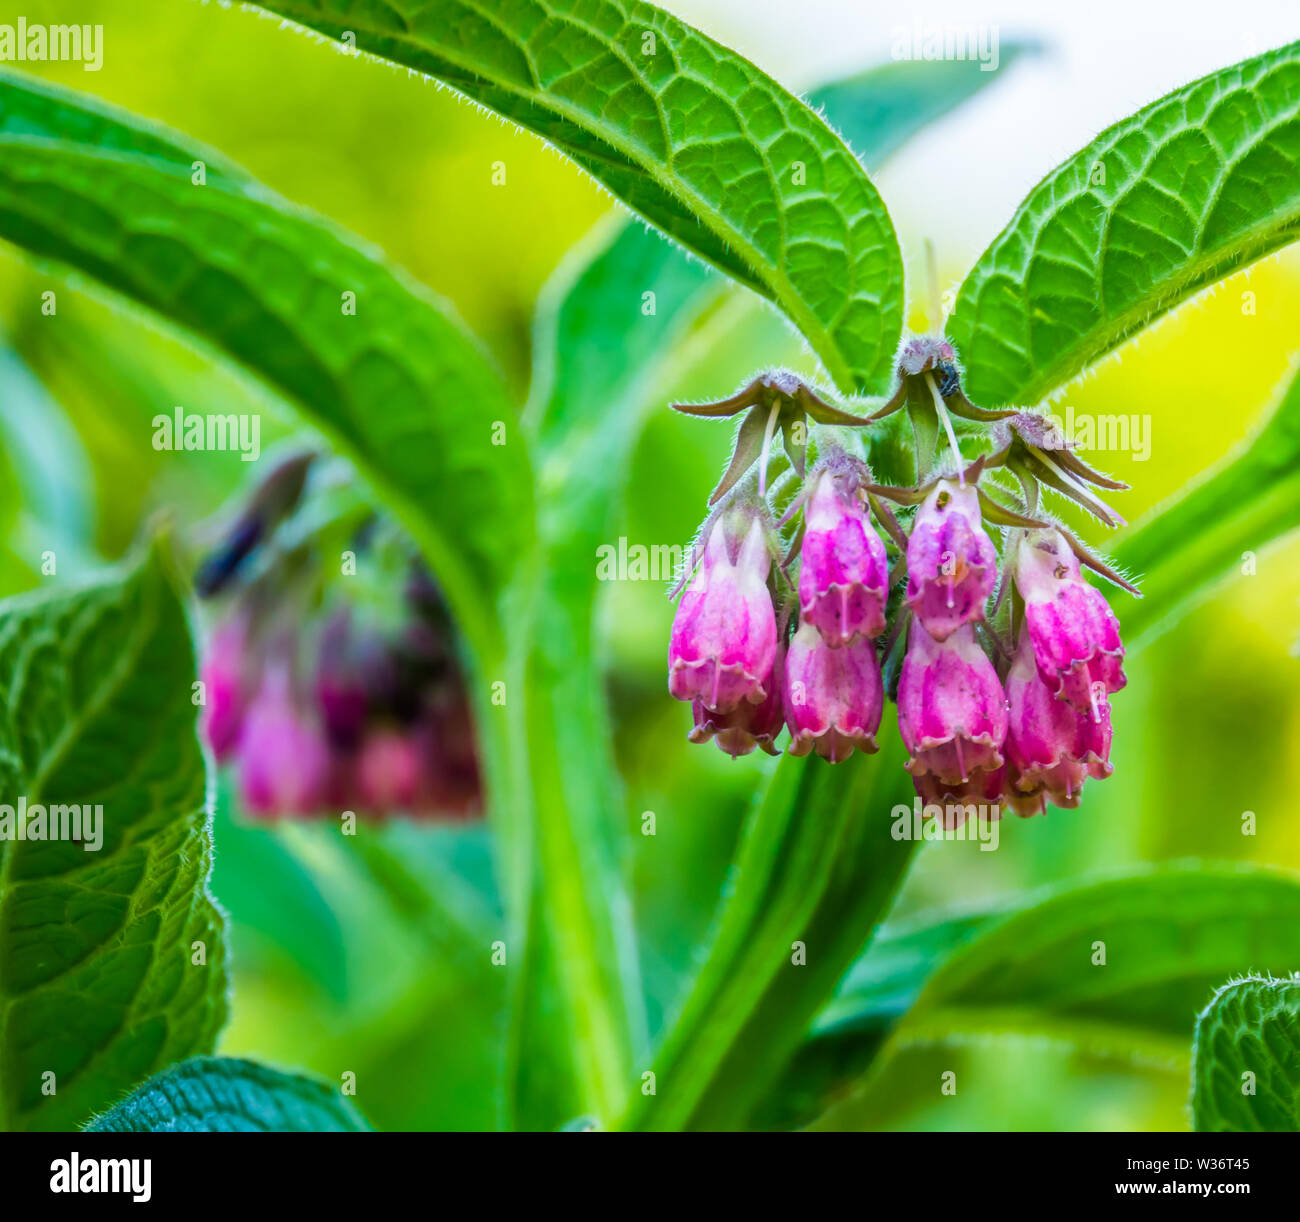 purple bell shaped flowers in bloom on a common comfrey plant, wild flowering plant from Europe, Nature background Stock Photo